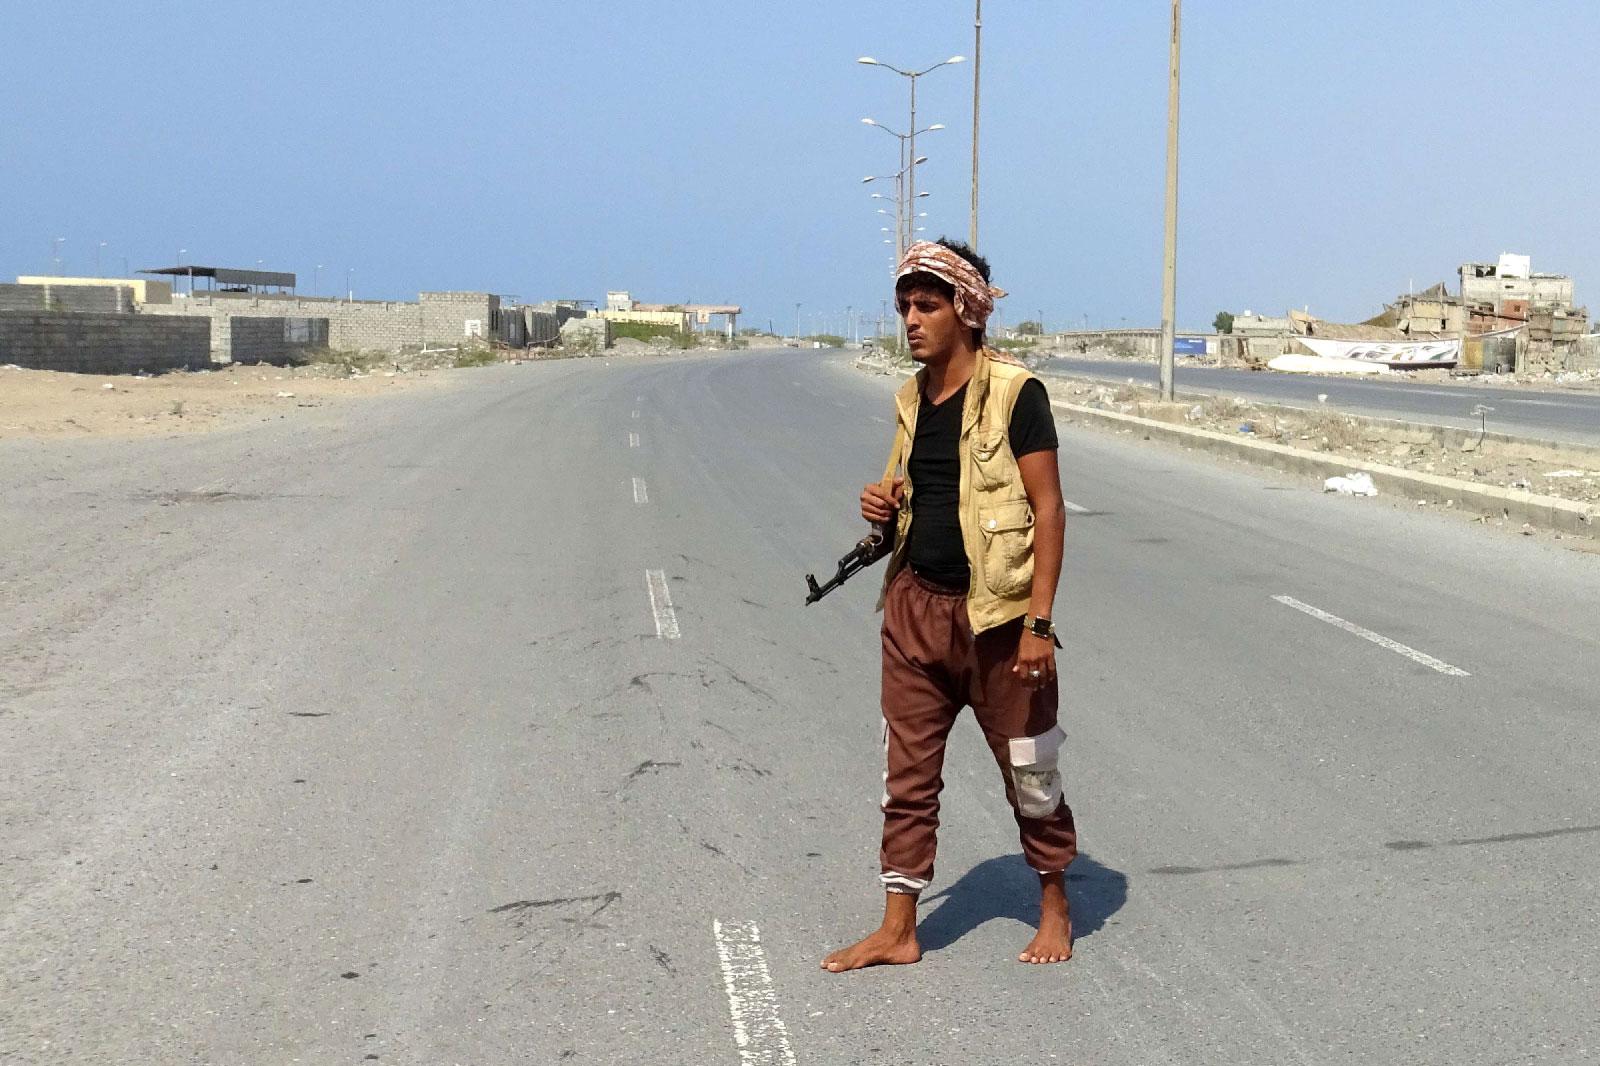 A member of the Yemeni pro-government forces walks with his rifle at the eastern entrance of the port city of Hodeidah on December 30, 2018